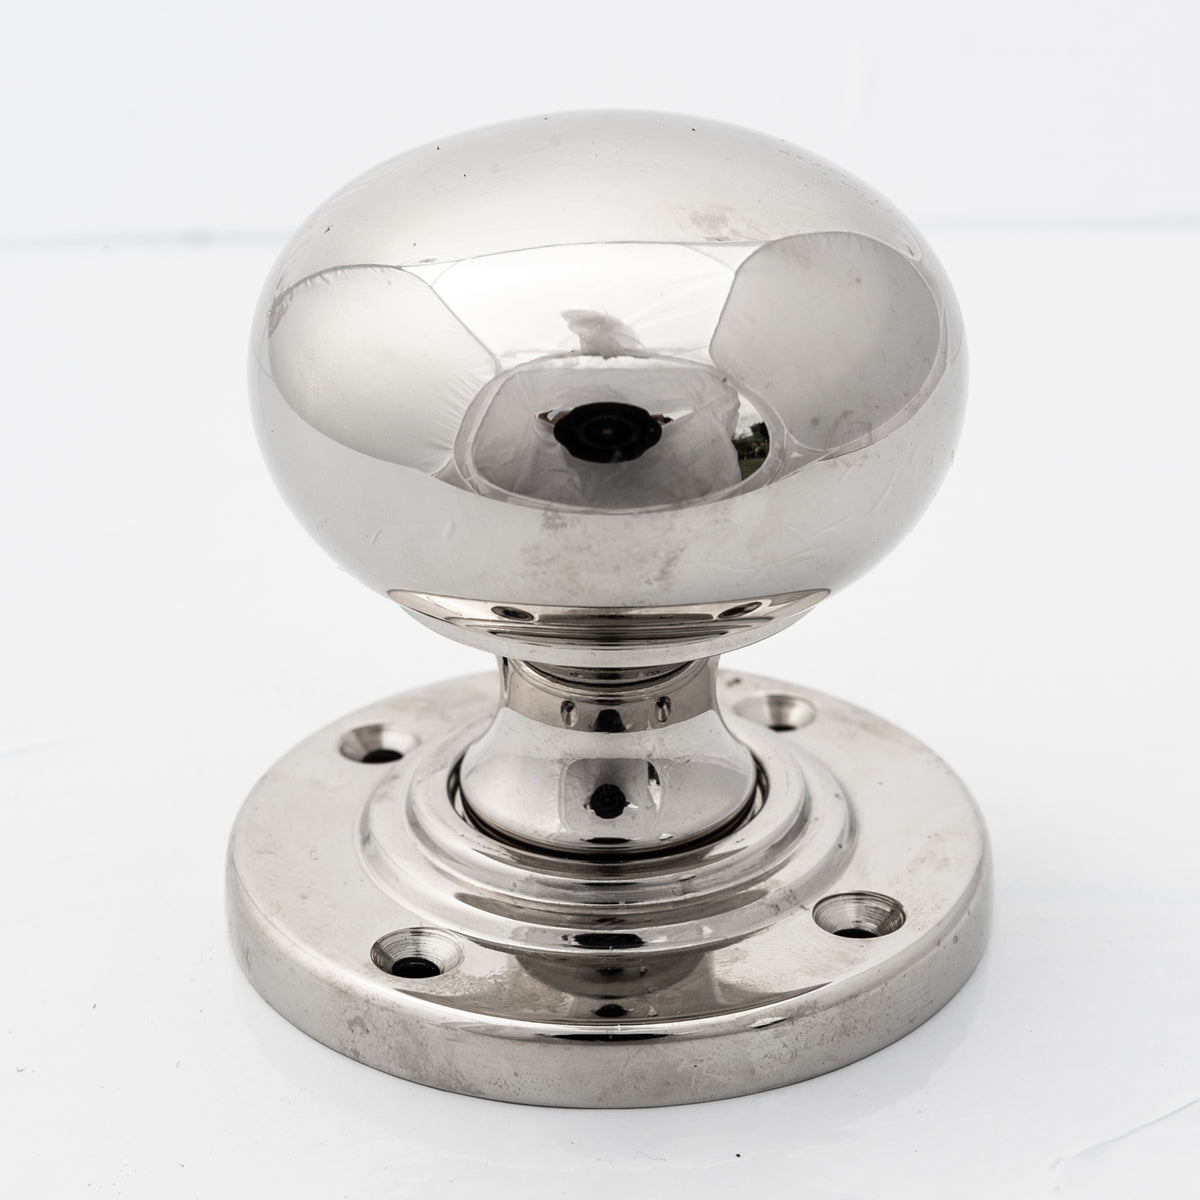 Reclaimed Polished Chrome Door Knob 3 Available | The Architectural Forum